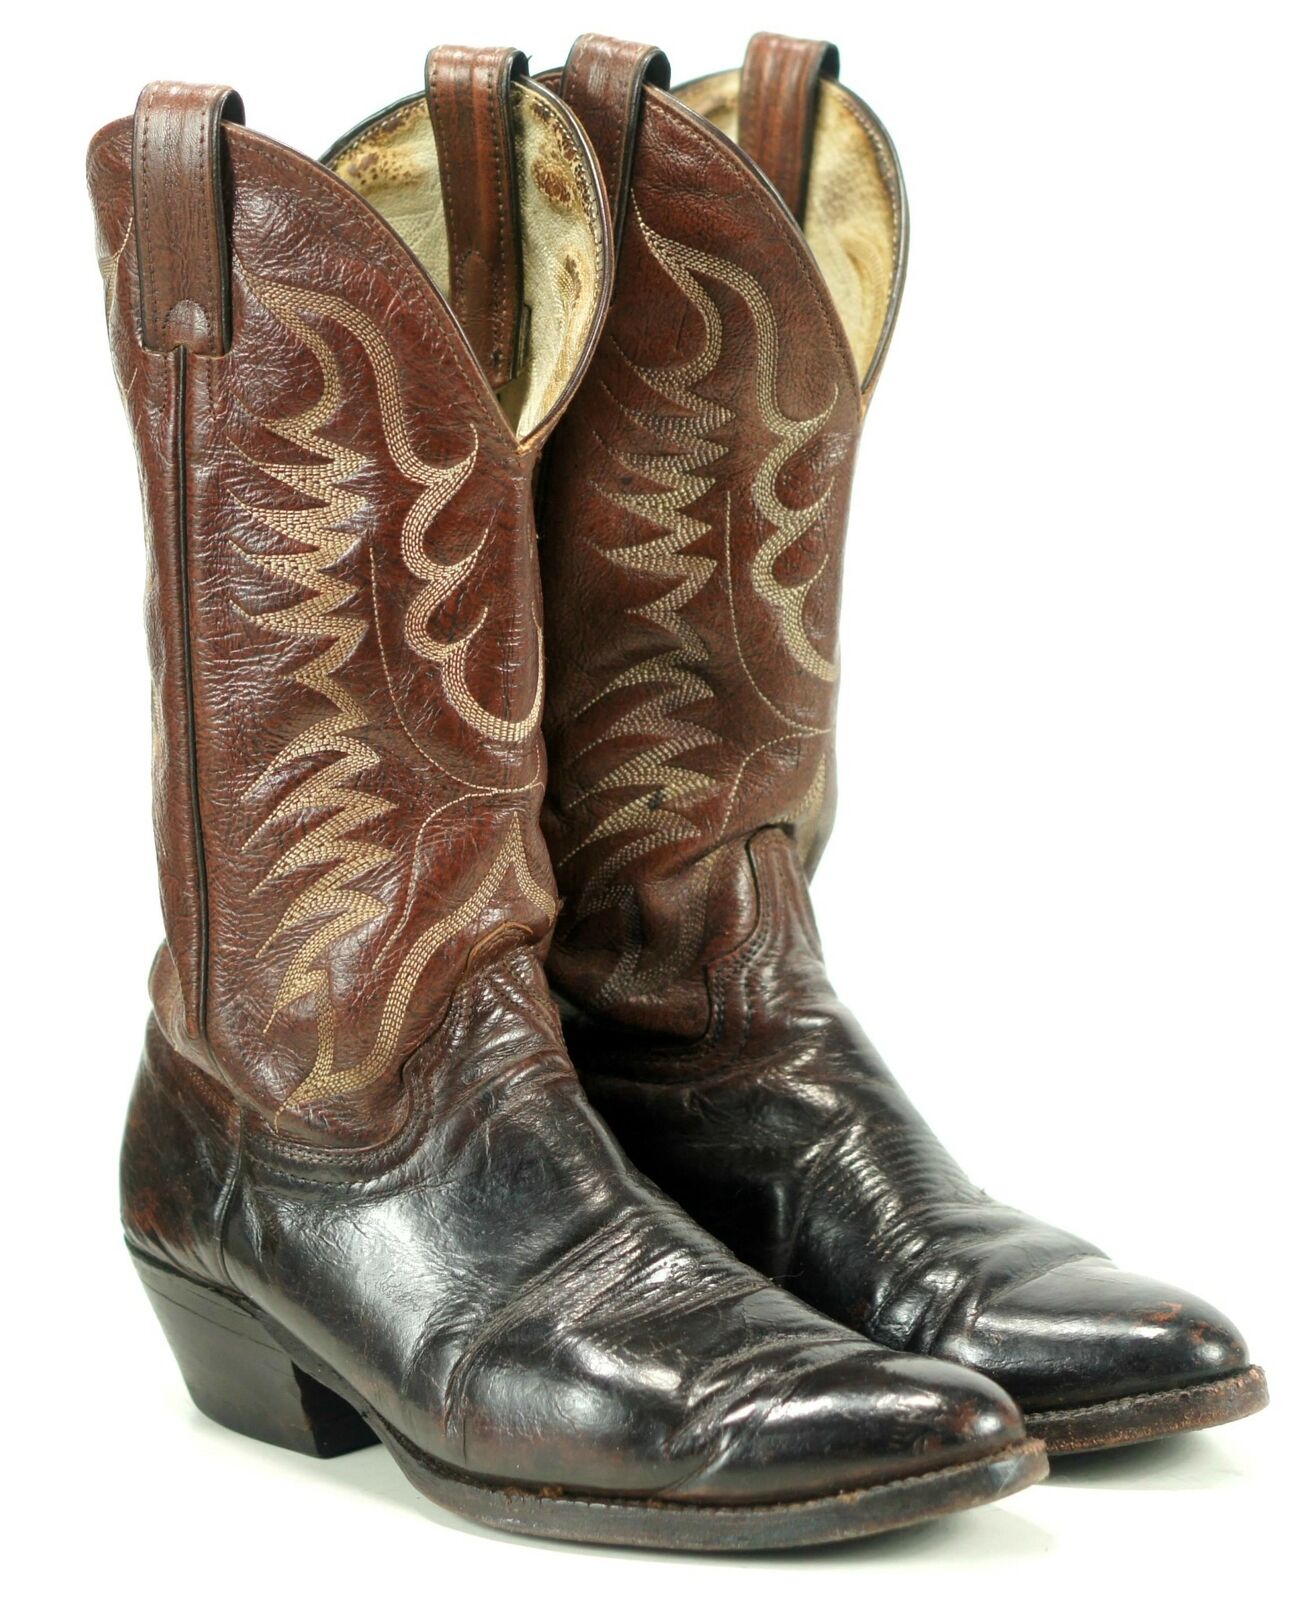 Abilene Men's Western Cowboy Boots Brown Leather Patina Vintage US Made 8.5 D